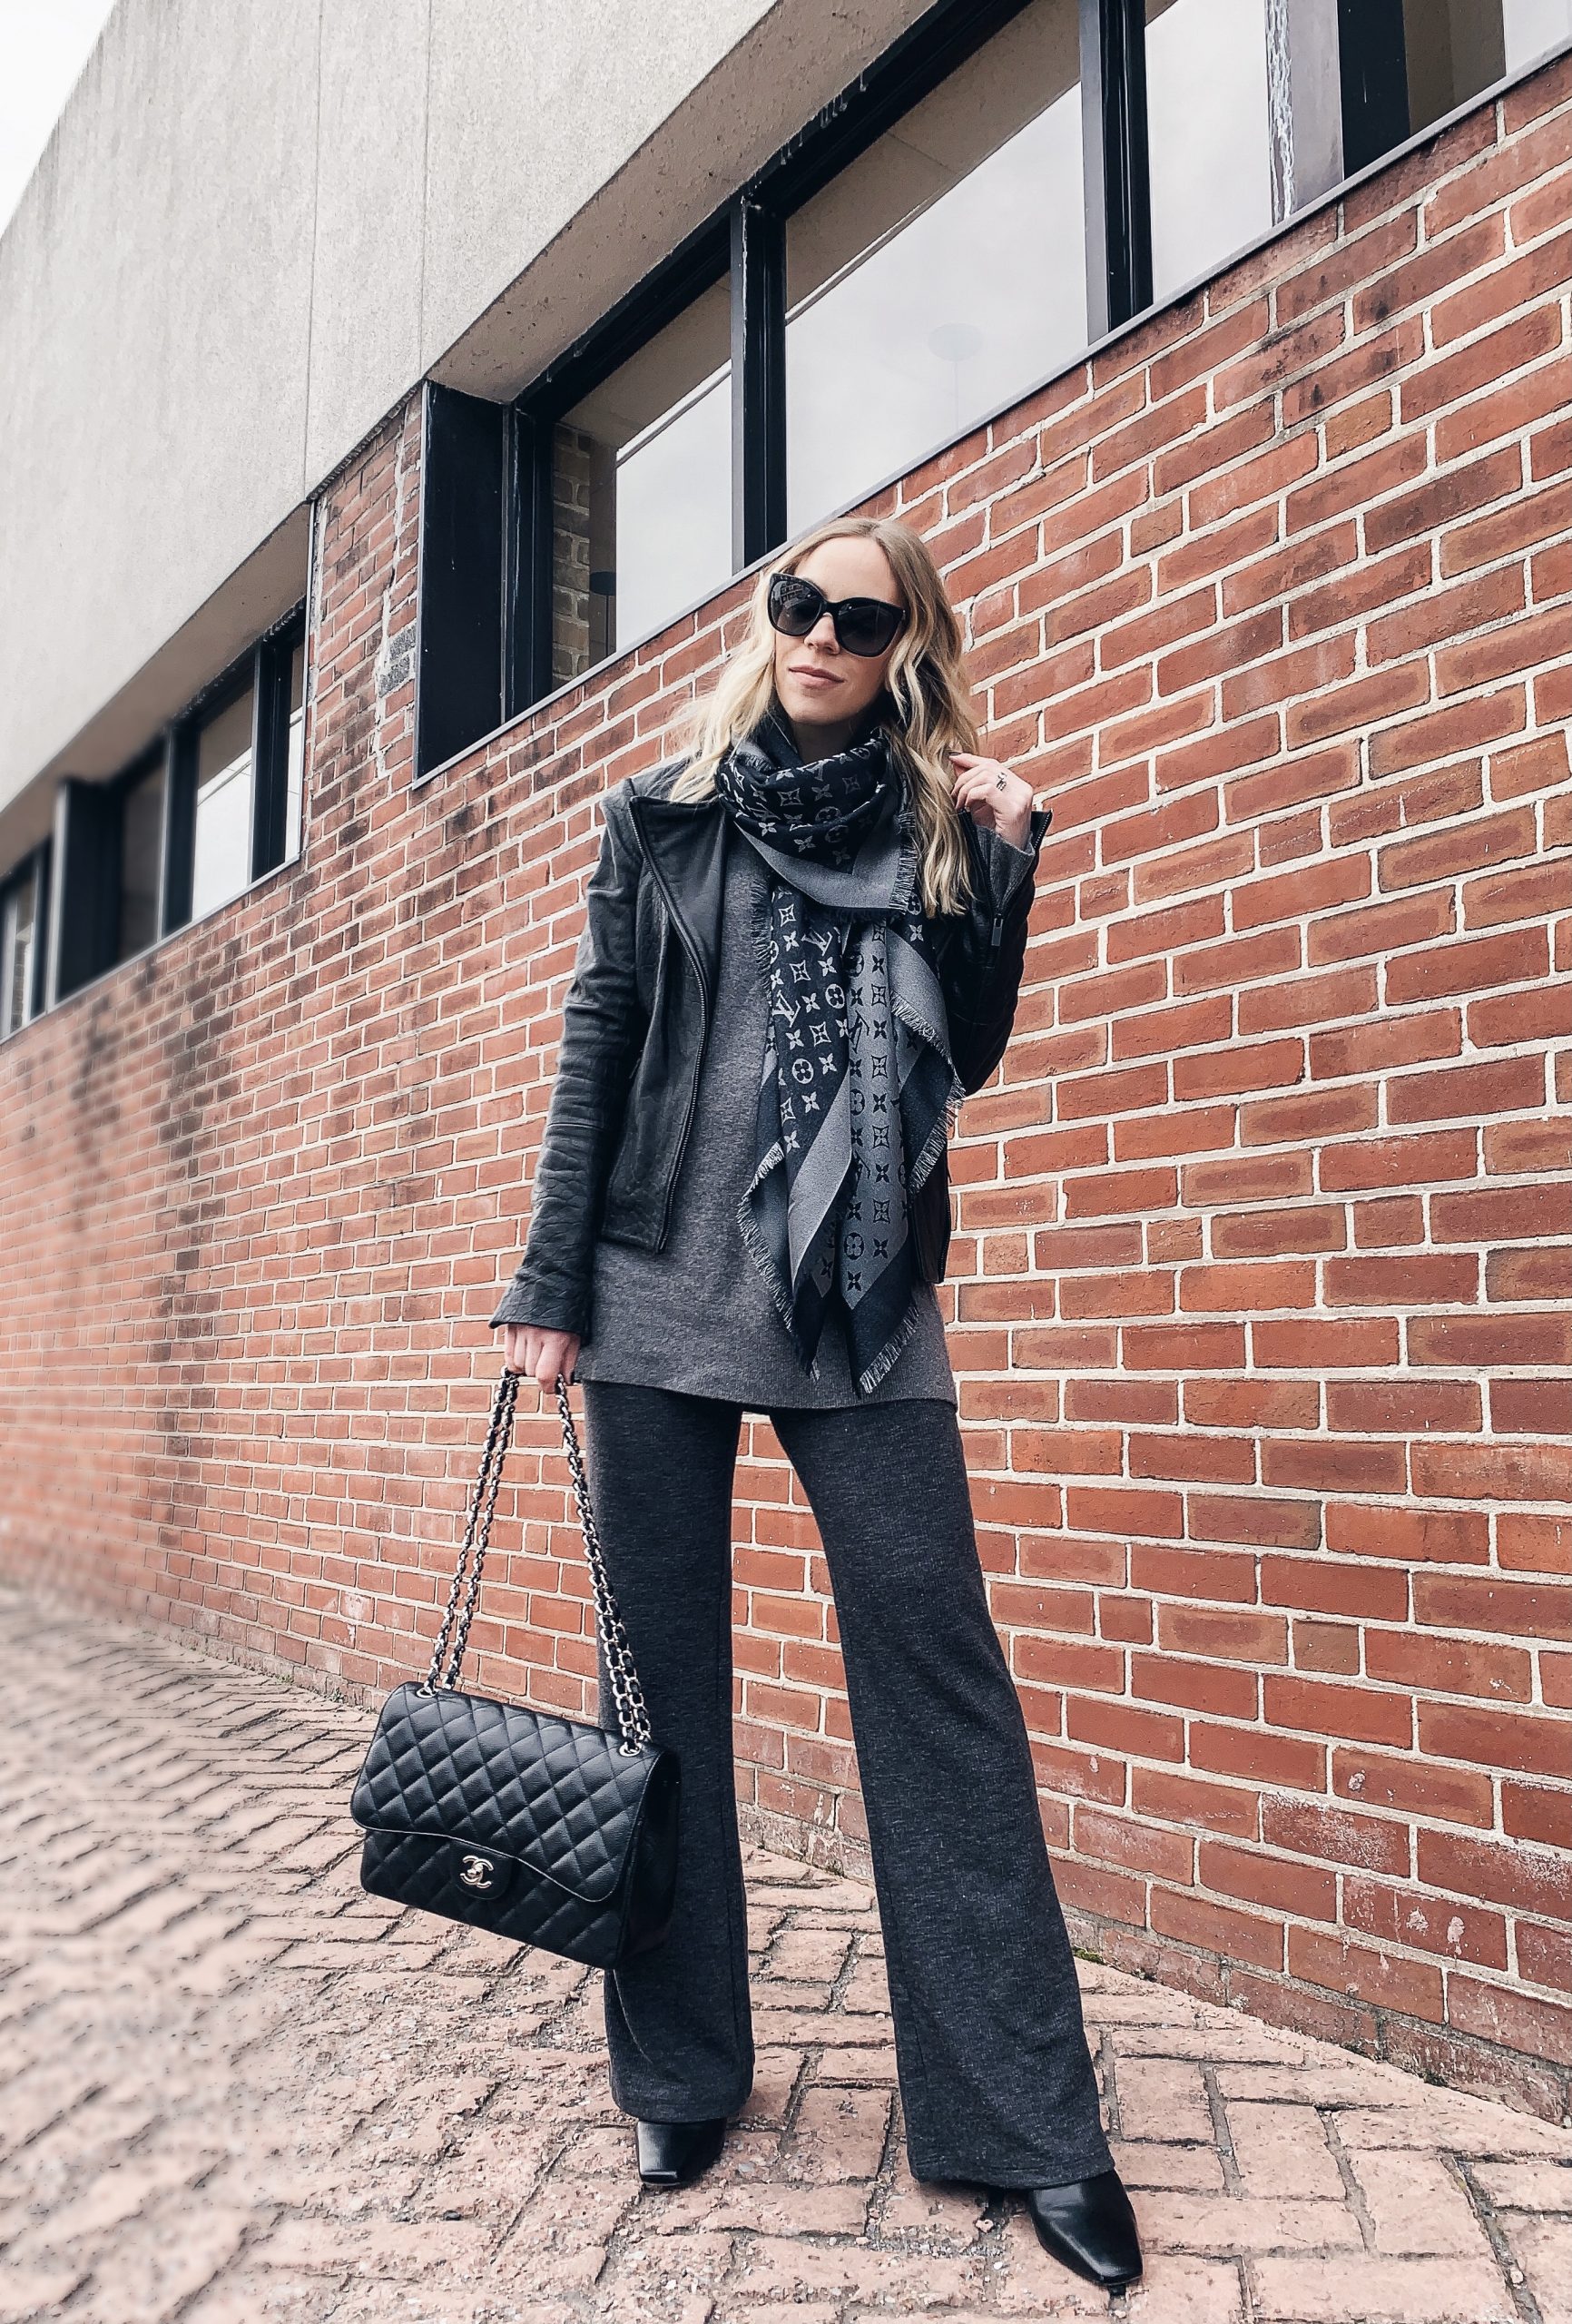 https://www.meagansmoda.com/wp-content/uploads/2021/01/Meagan-Brandon-fashion-blogger-of-Meagans-Moda-wears-flared-knit-pants-with-leather-jacket-and-Louis-Vuitton-scarf-how-to-elevate-loungewear-scaled.jpg